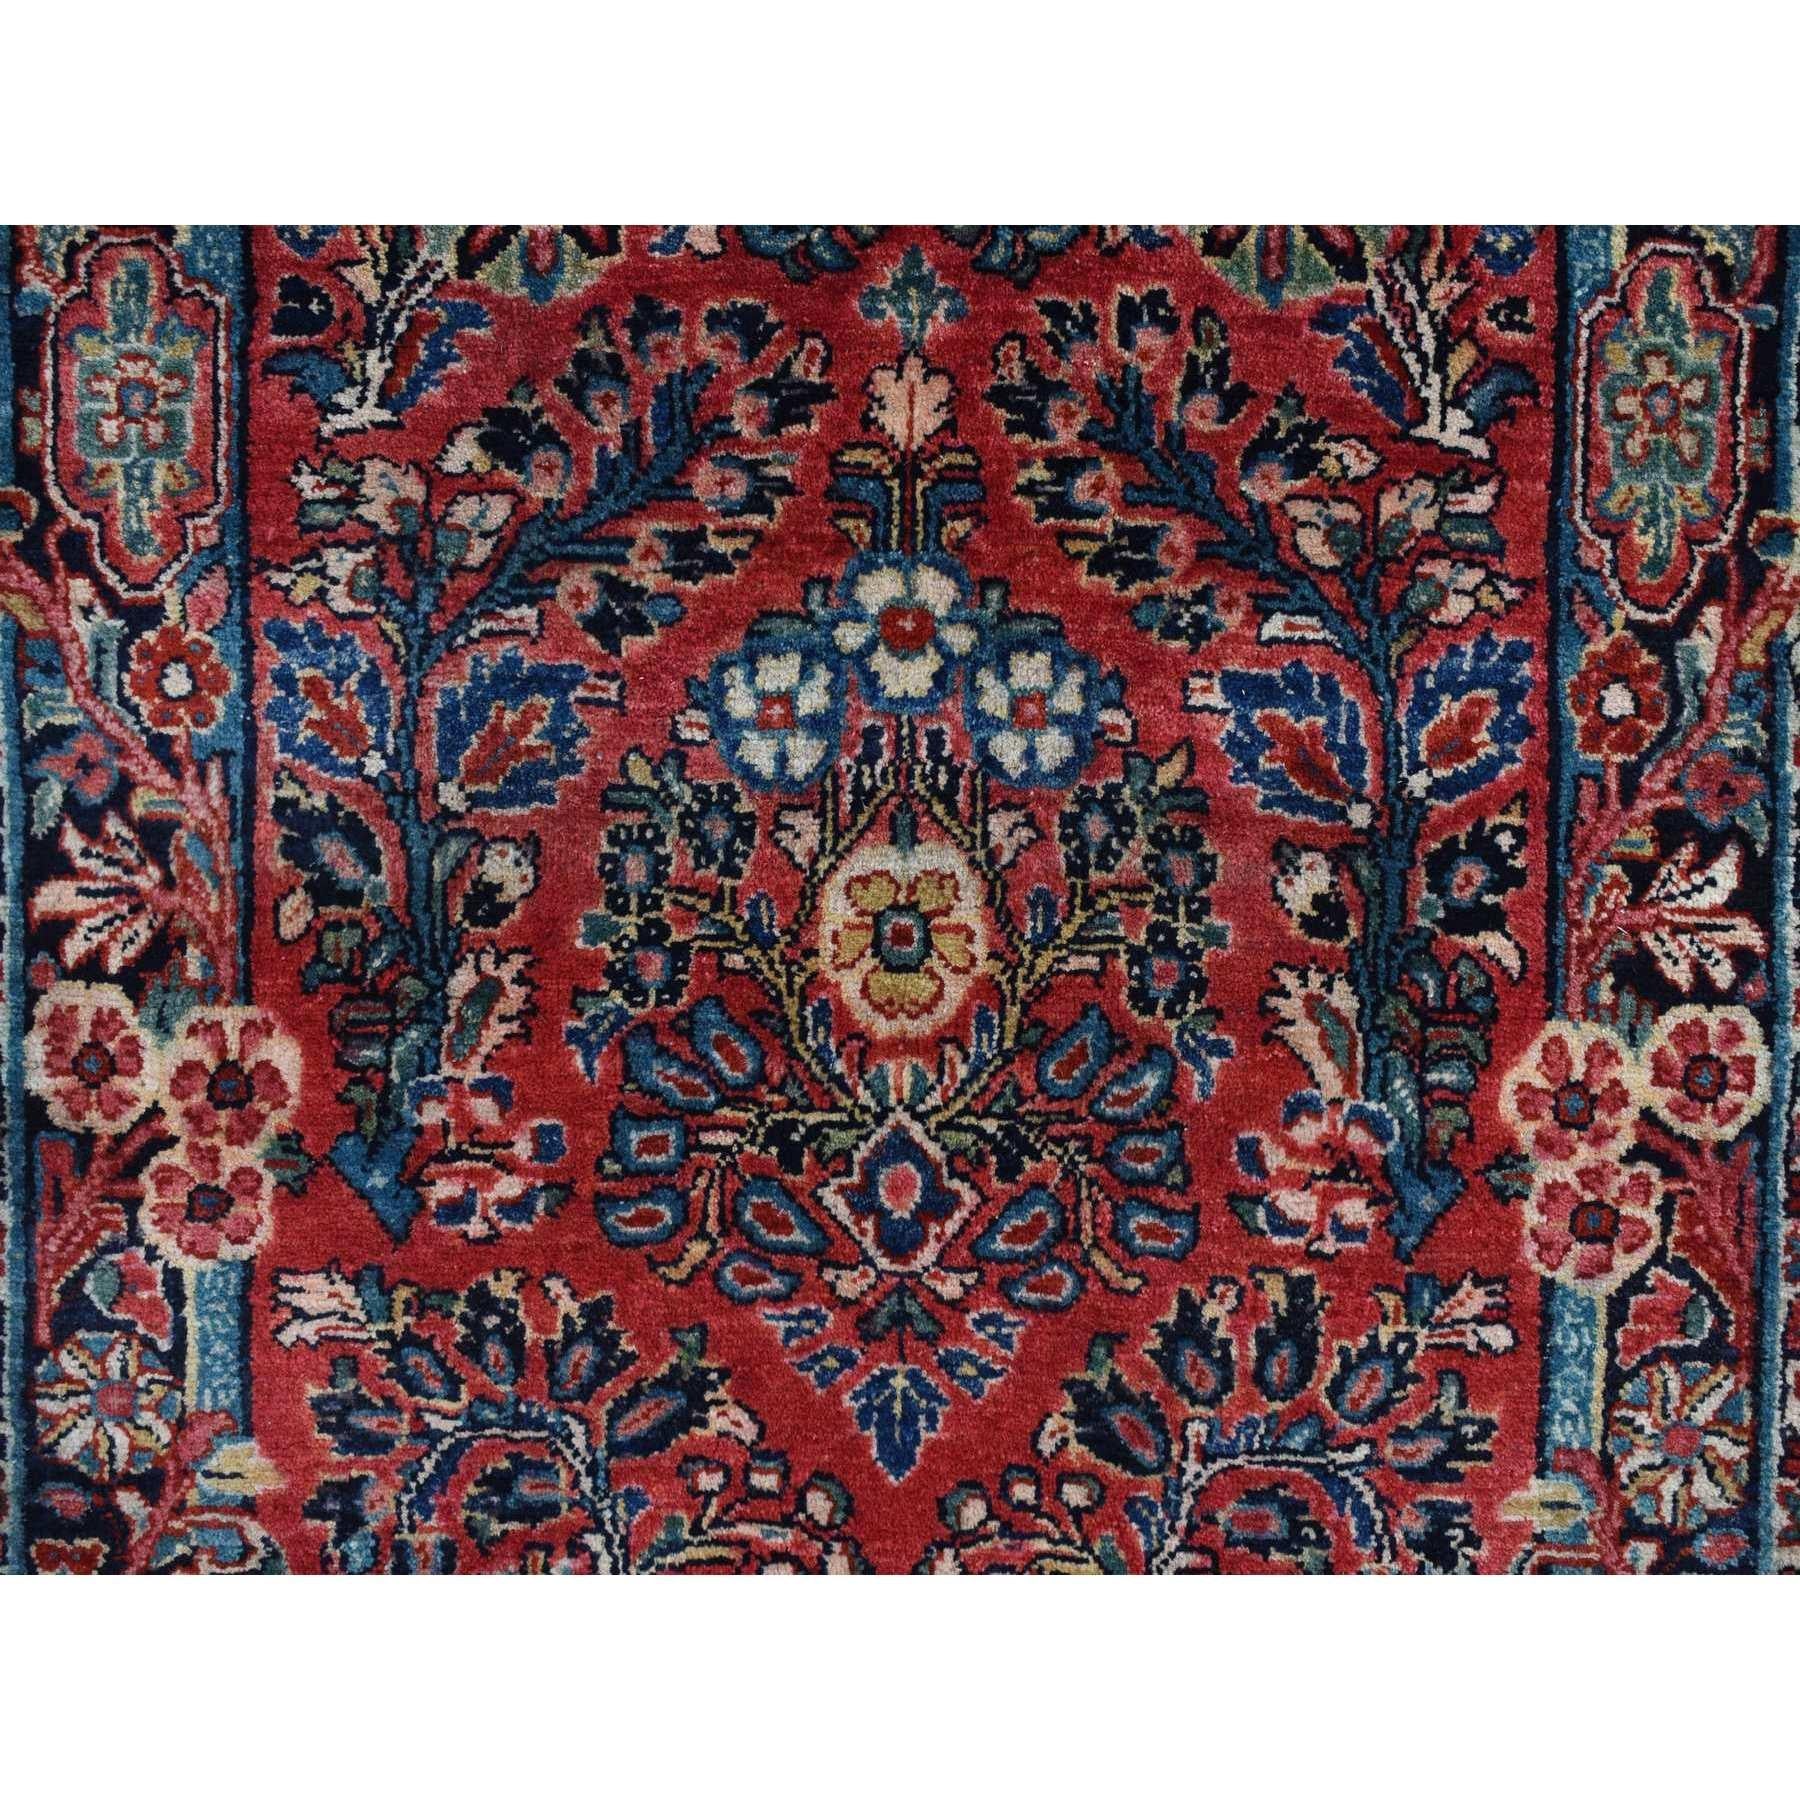 Red Antique Persian Saroogh Hand Knotted Wool Cleaned XL Runner Rug 2'6